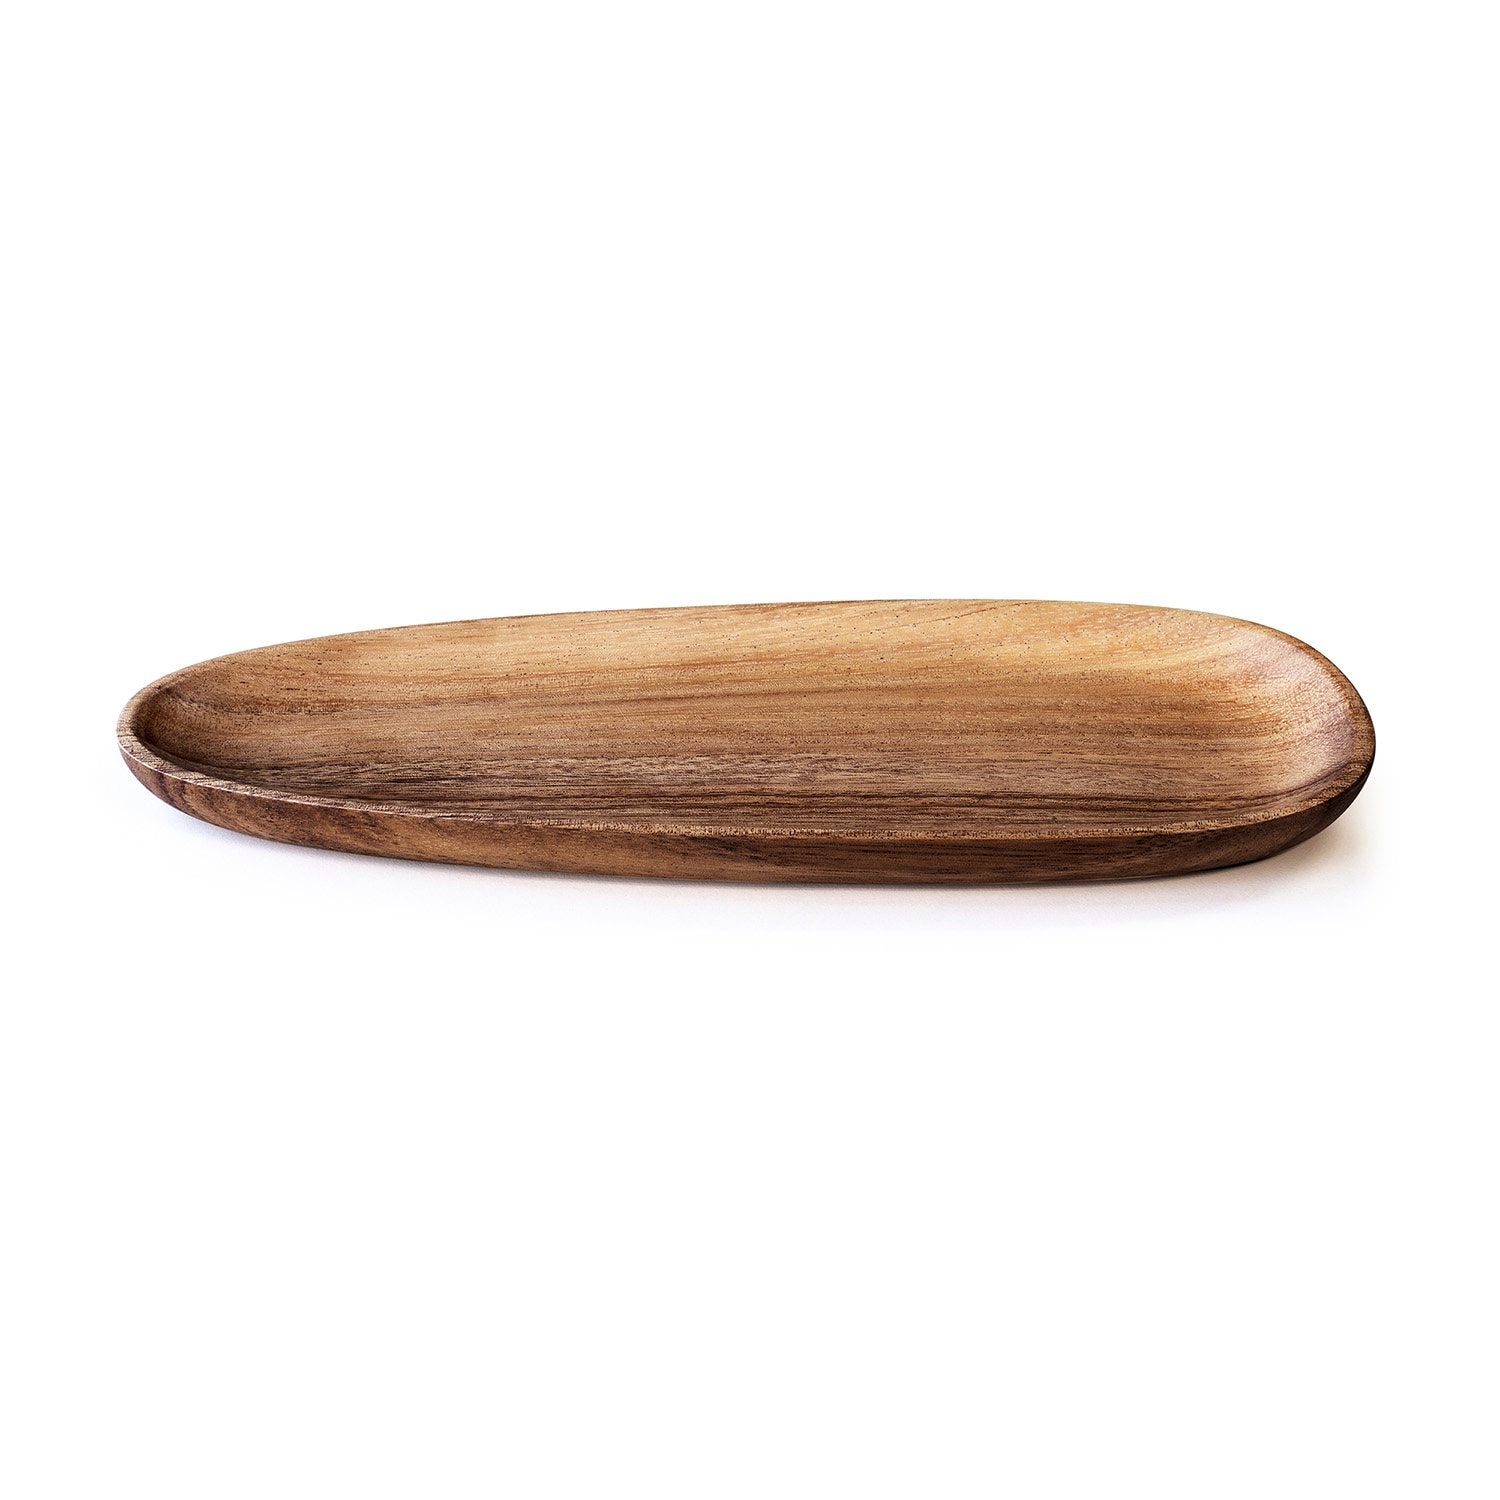 Large wooden plate